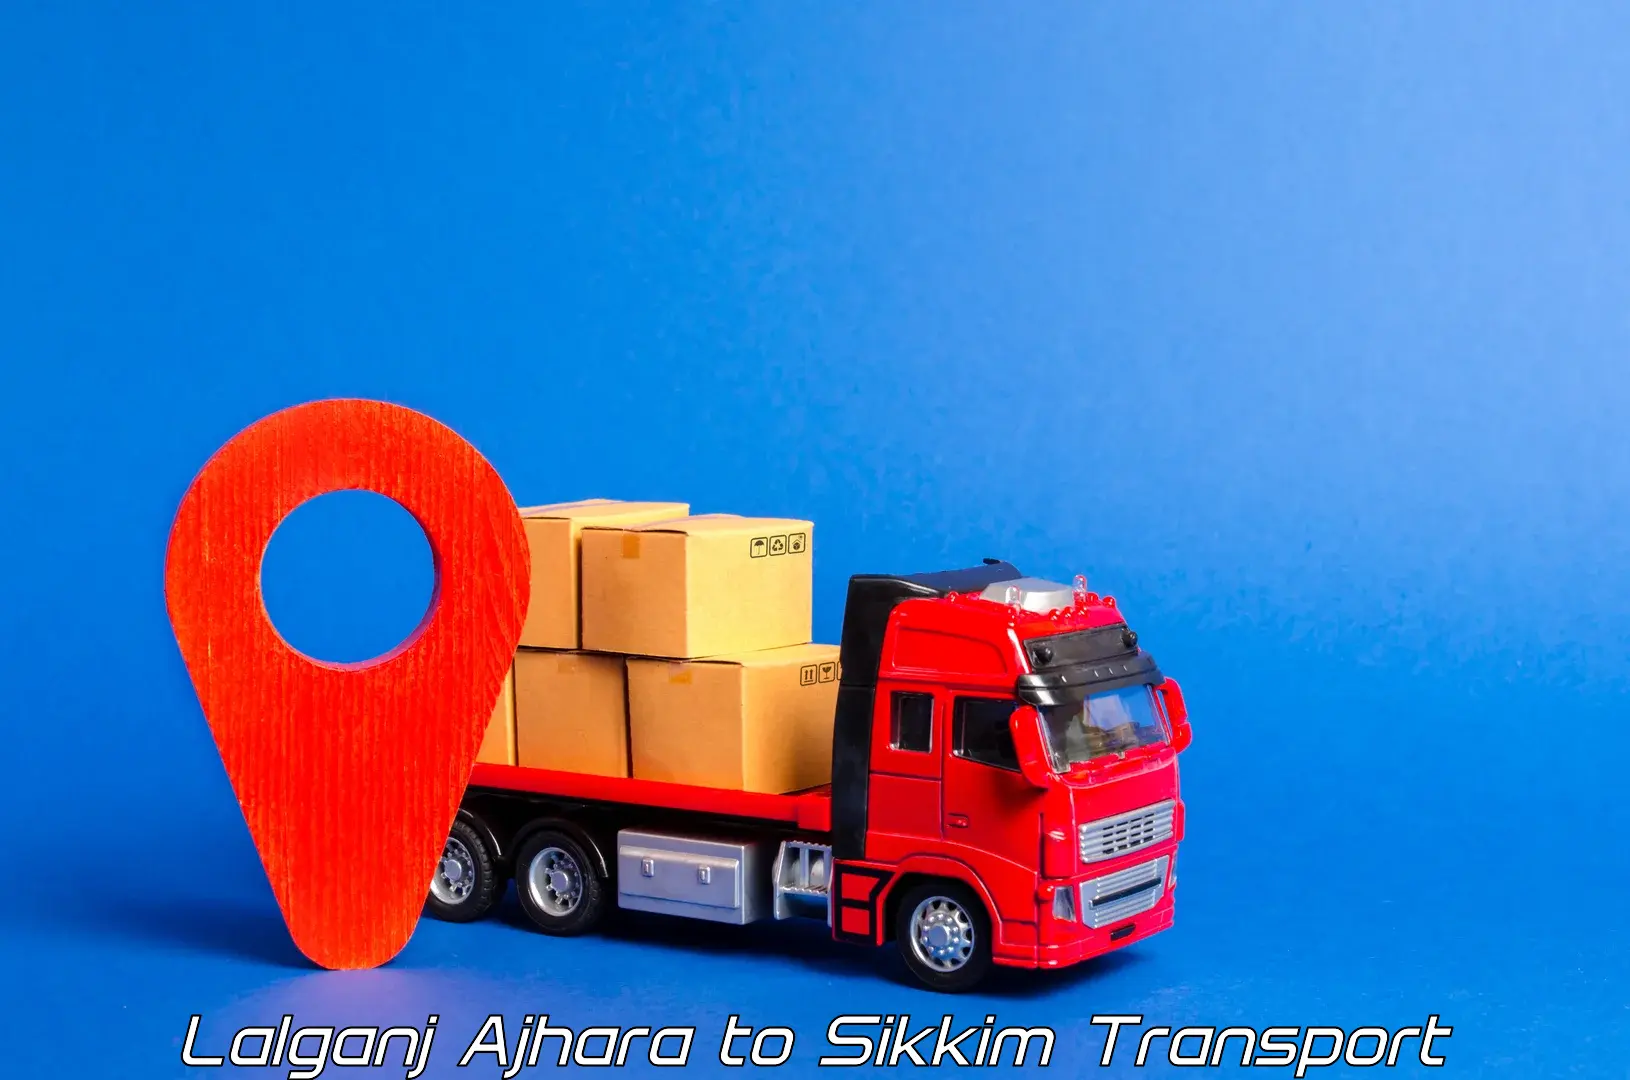 Transport bike from one state to another Lalganj Ajhara to Sikkim